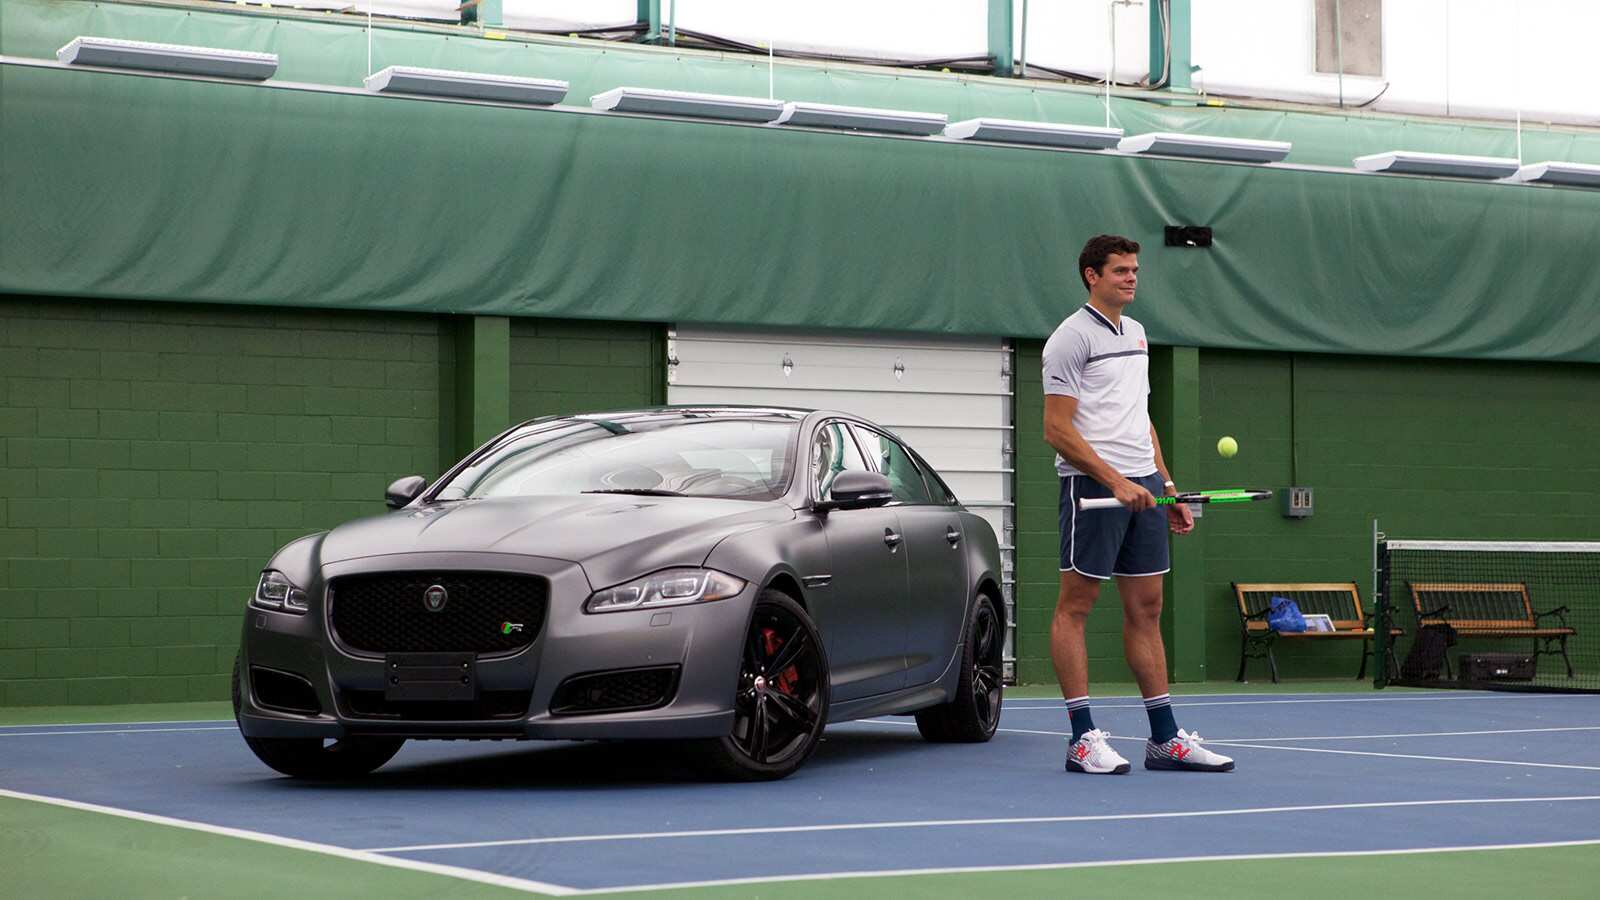 Milos Raonic experiences performance off the court.